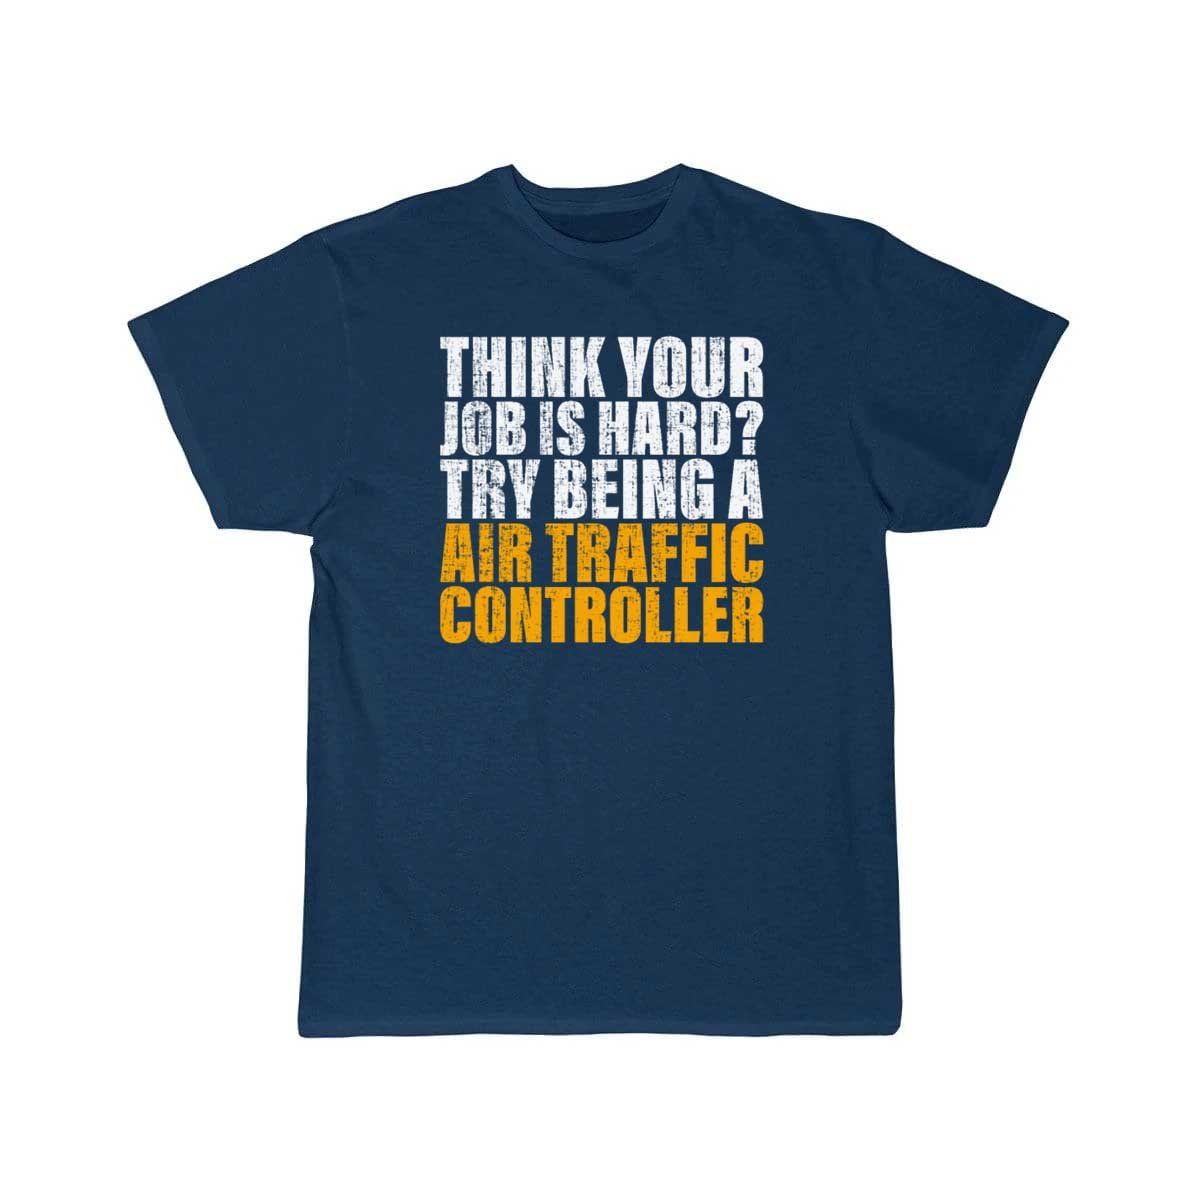 Try Being A Air Traffic Controller Design for ATC T-SHIRT THE AV8R